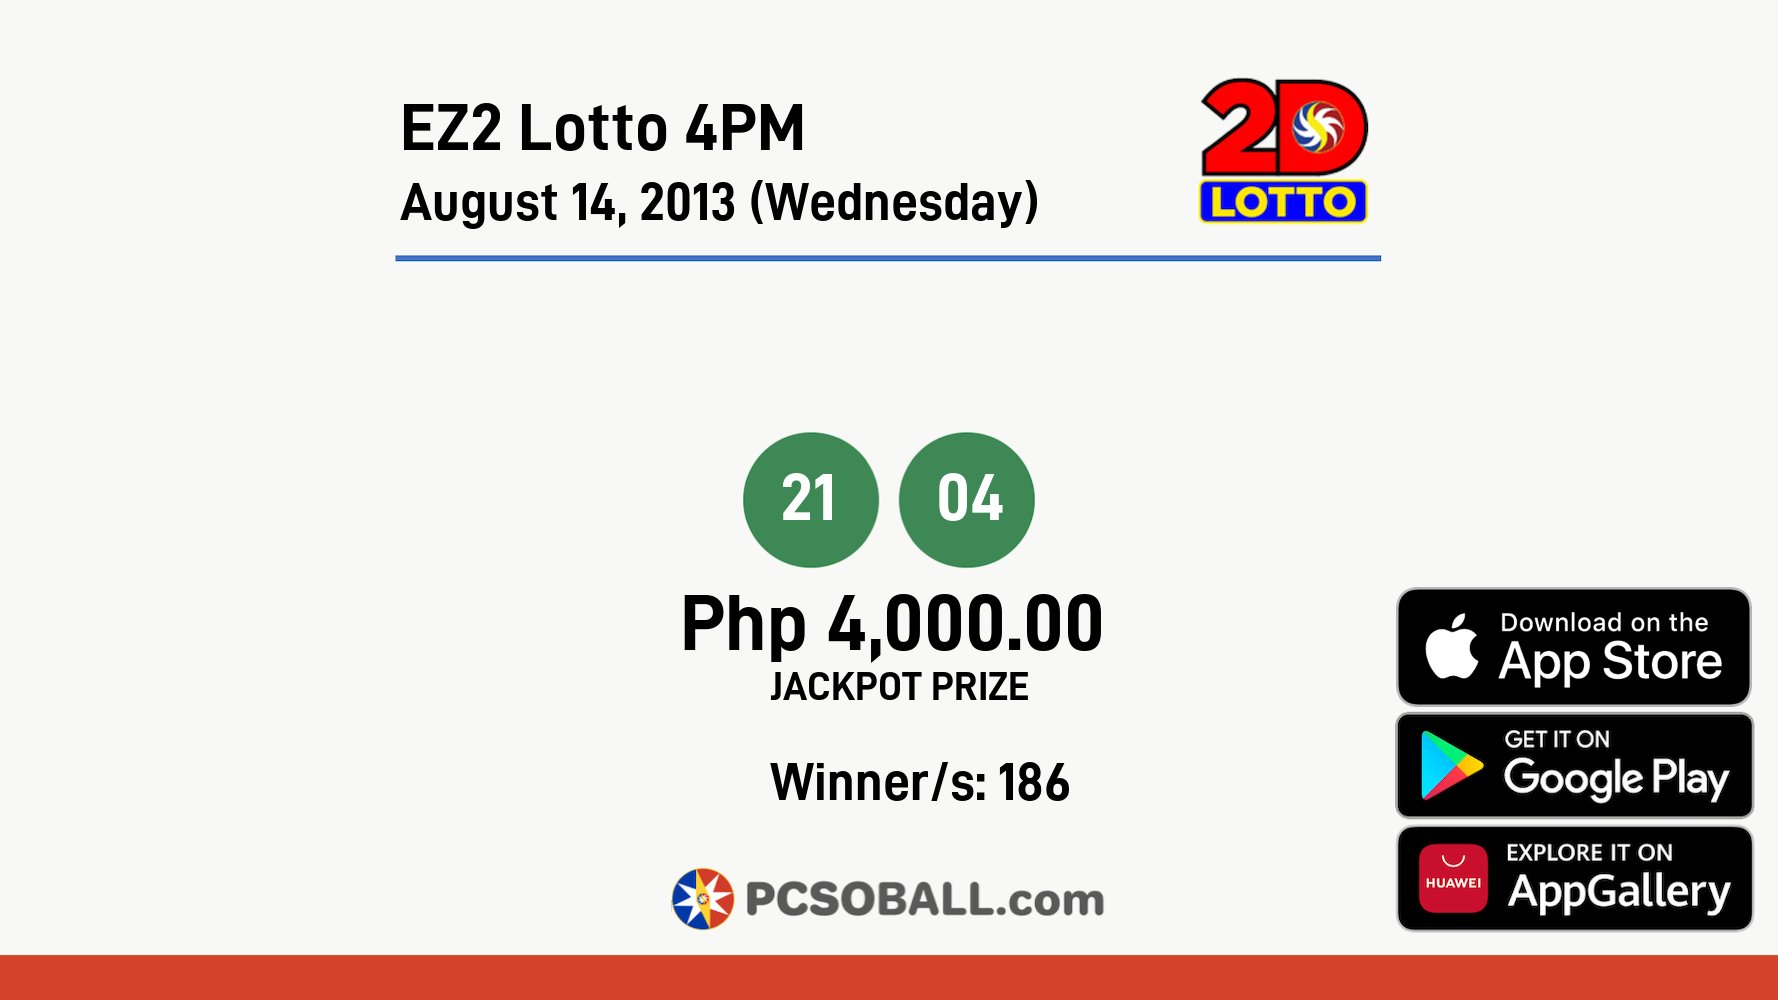 EZ2 Lotto 4PM August 14, 2013 (Wednesday) Result